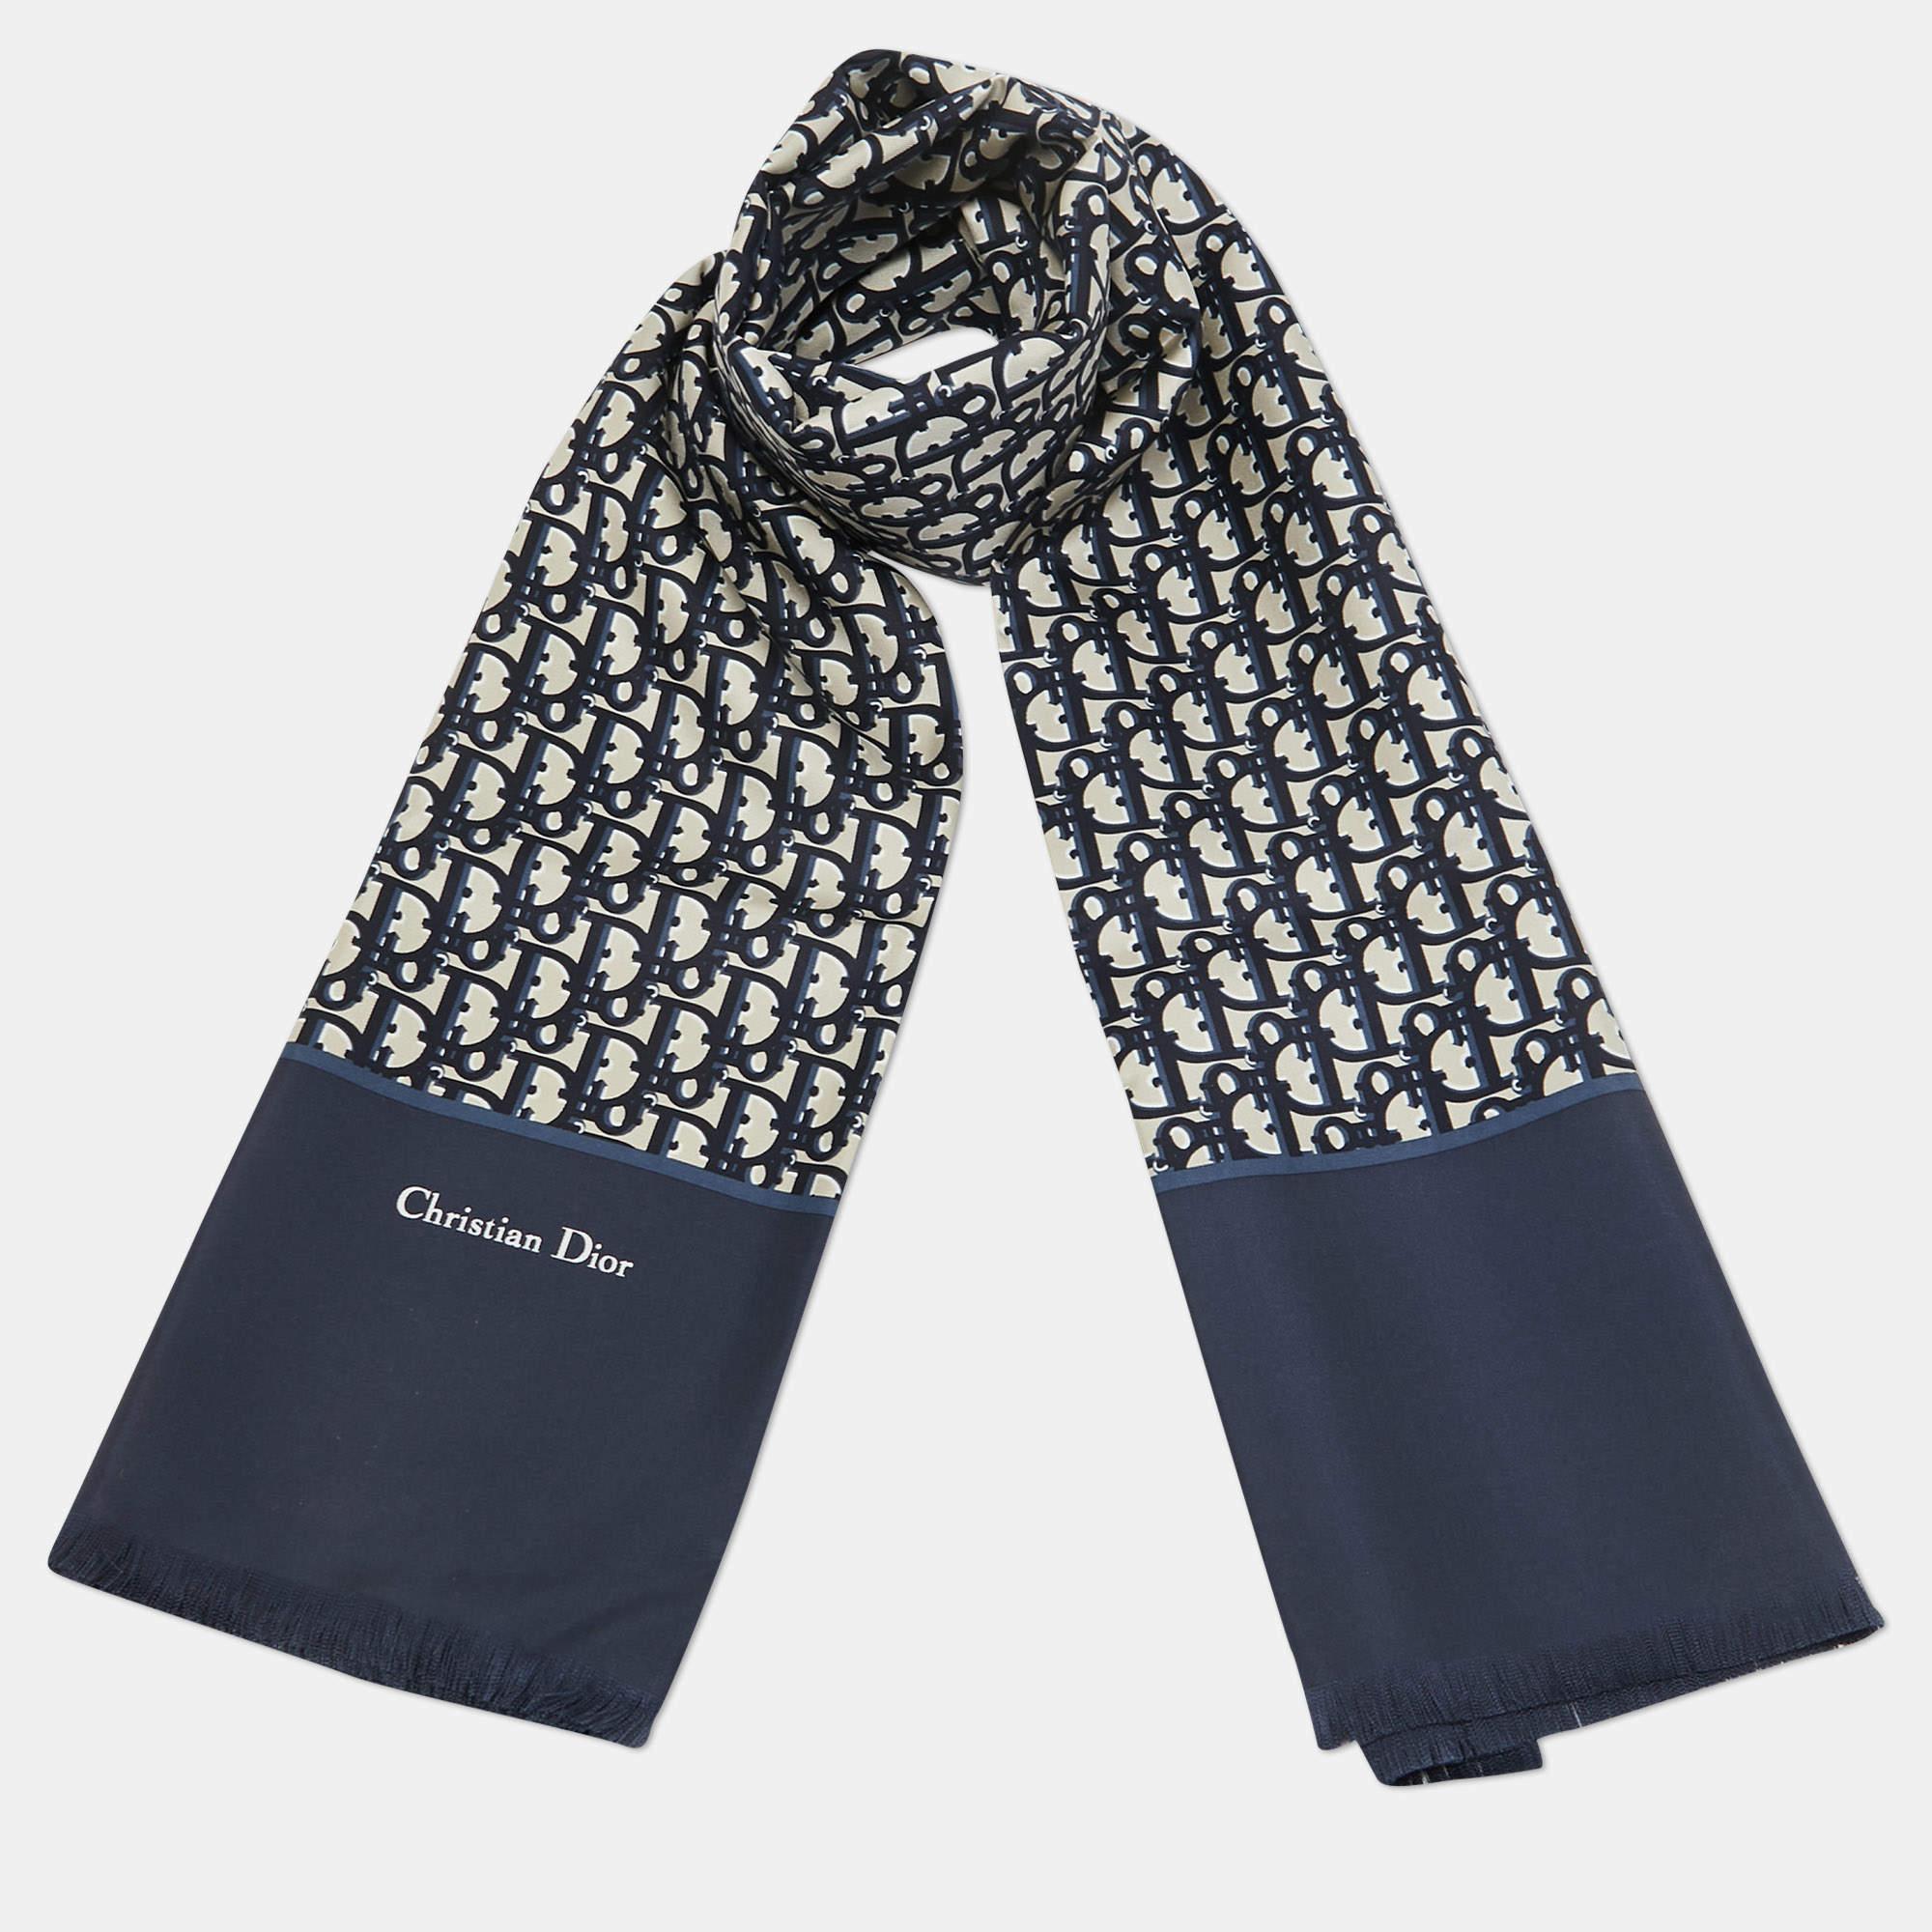 Dior Oblique stole crafted from silk can be styled as a head accessory or tied around the neck. The square scarf exhibits the brand's Oblique motif that was created in 1967, the 'Christian Dior' detail, and fringed edges.

Includes: Original Box,